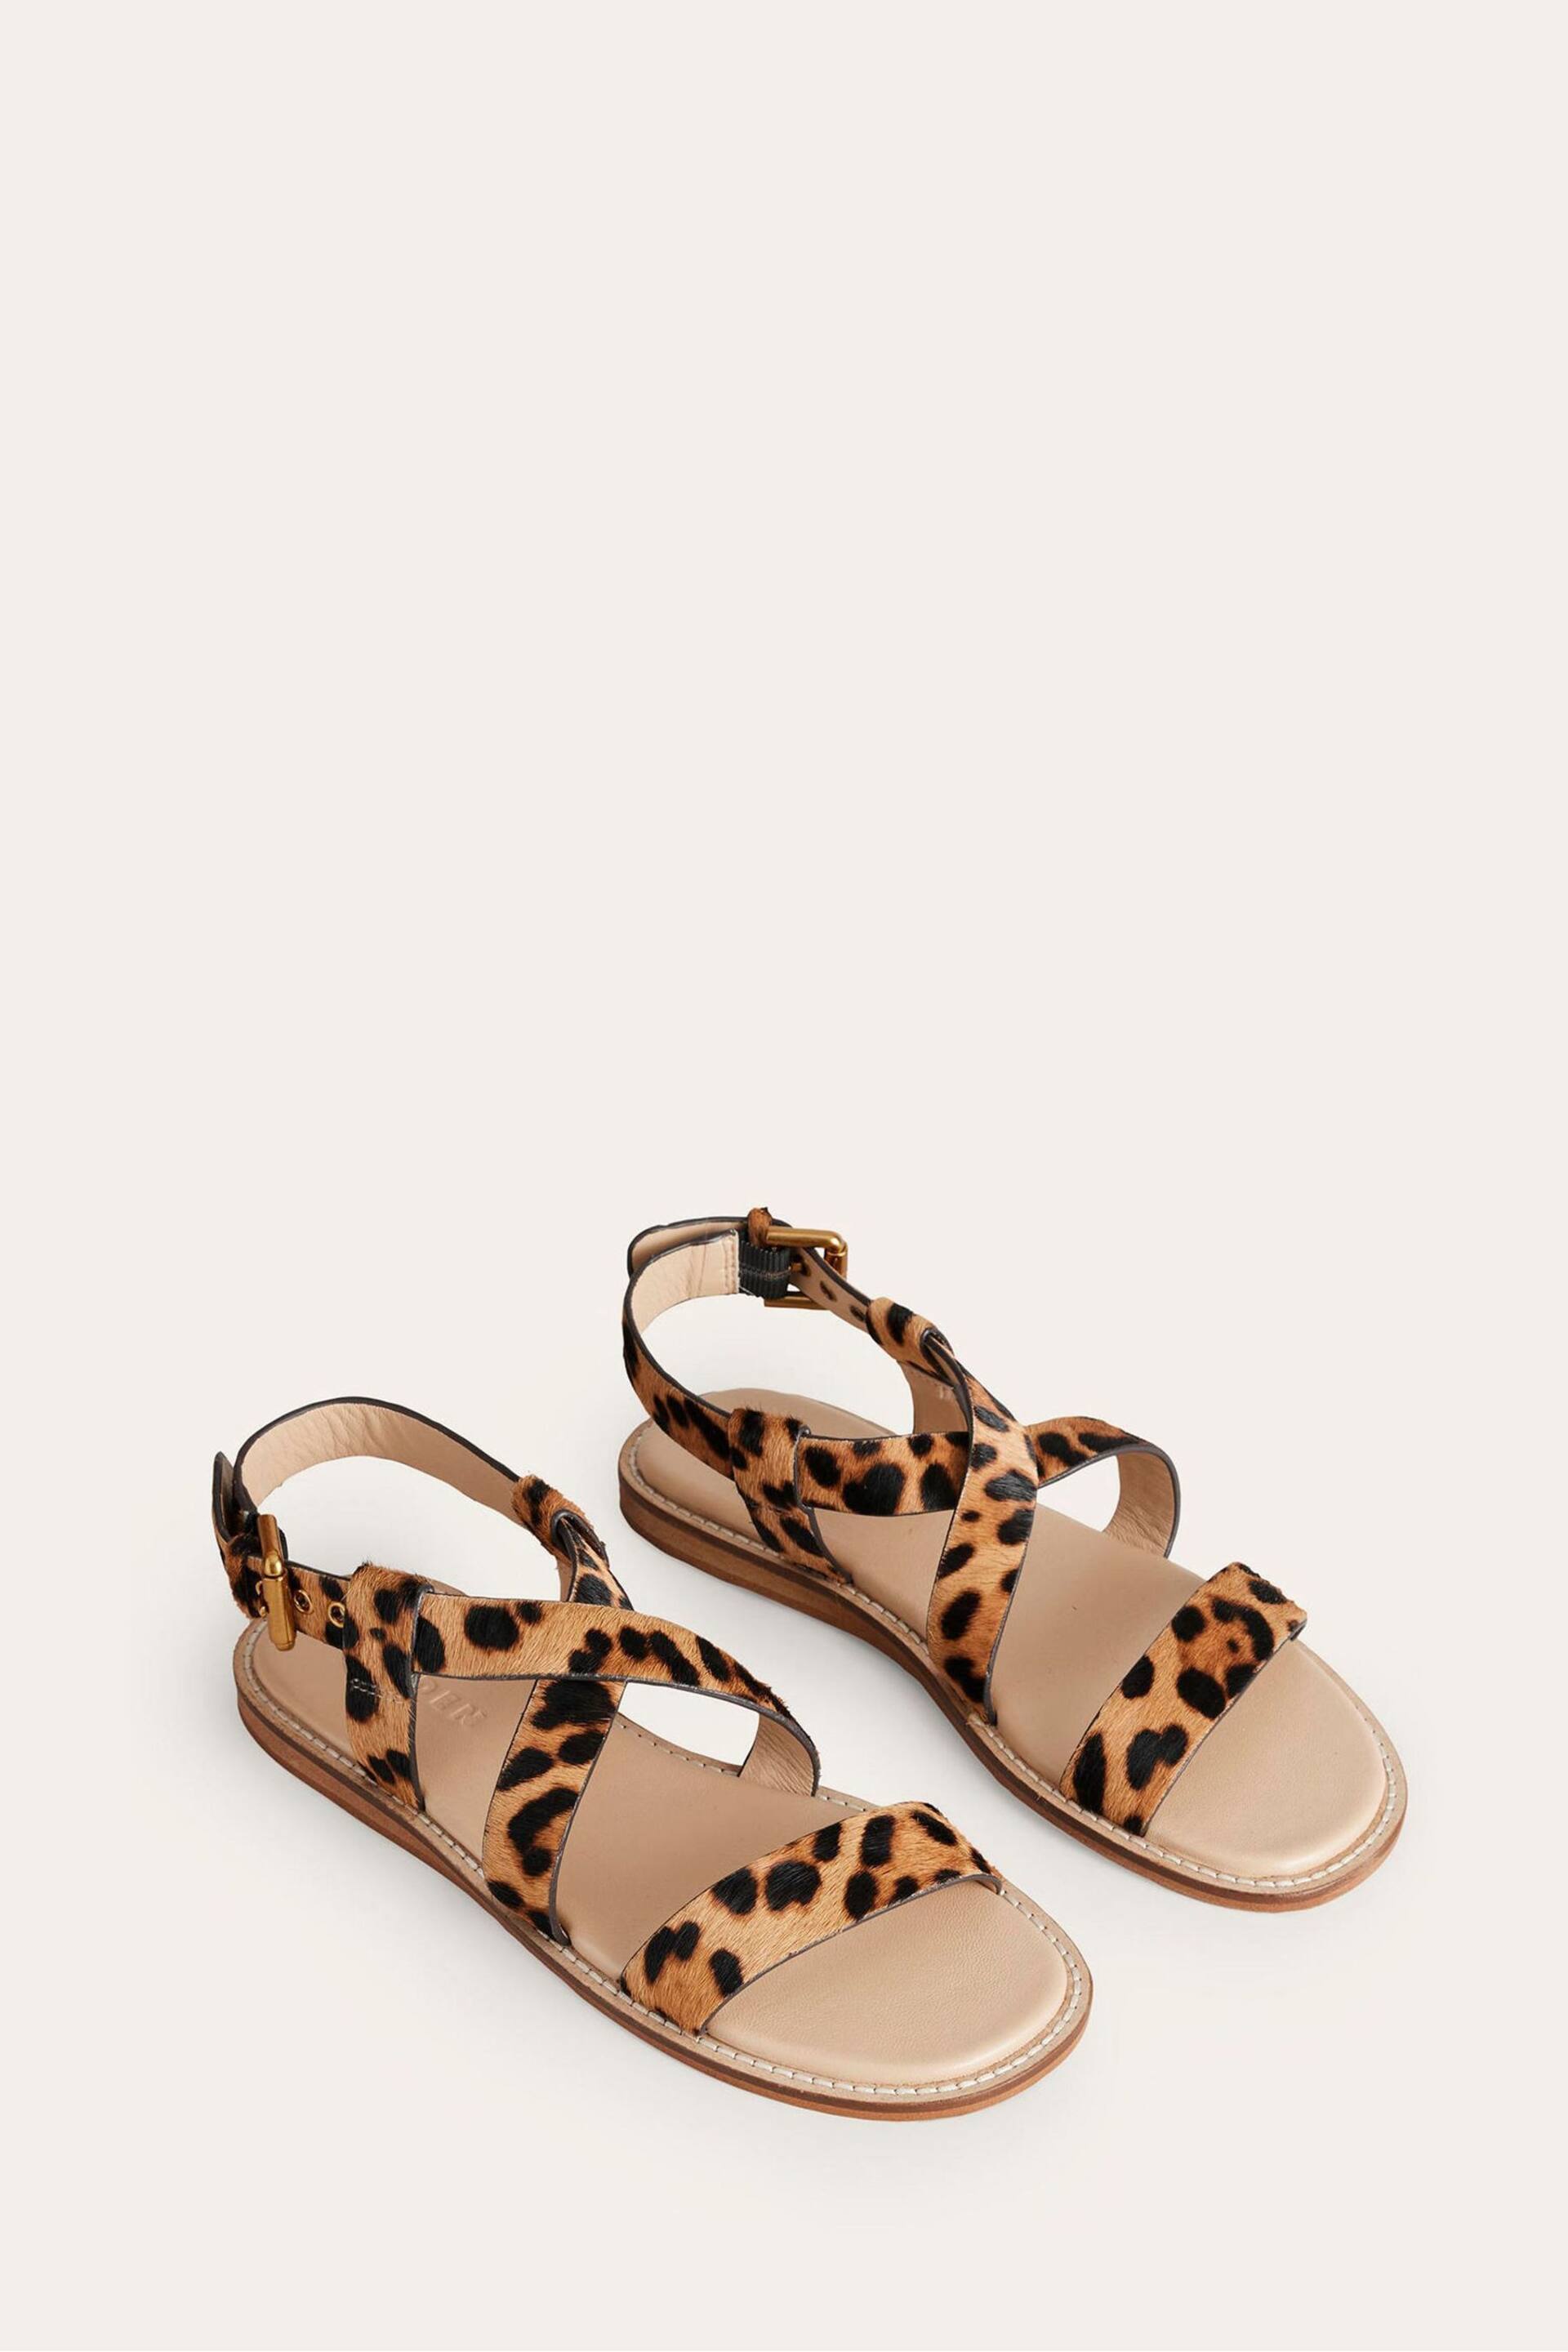 Boden Brown Cross-Strap Flat Sandals - Image 3 of 4